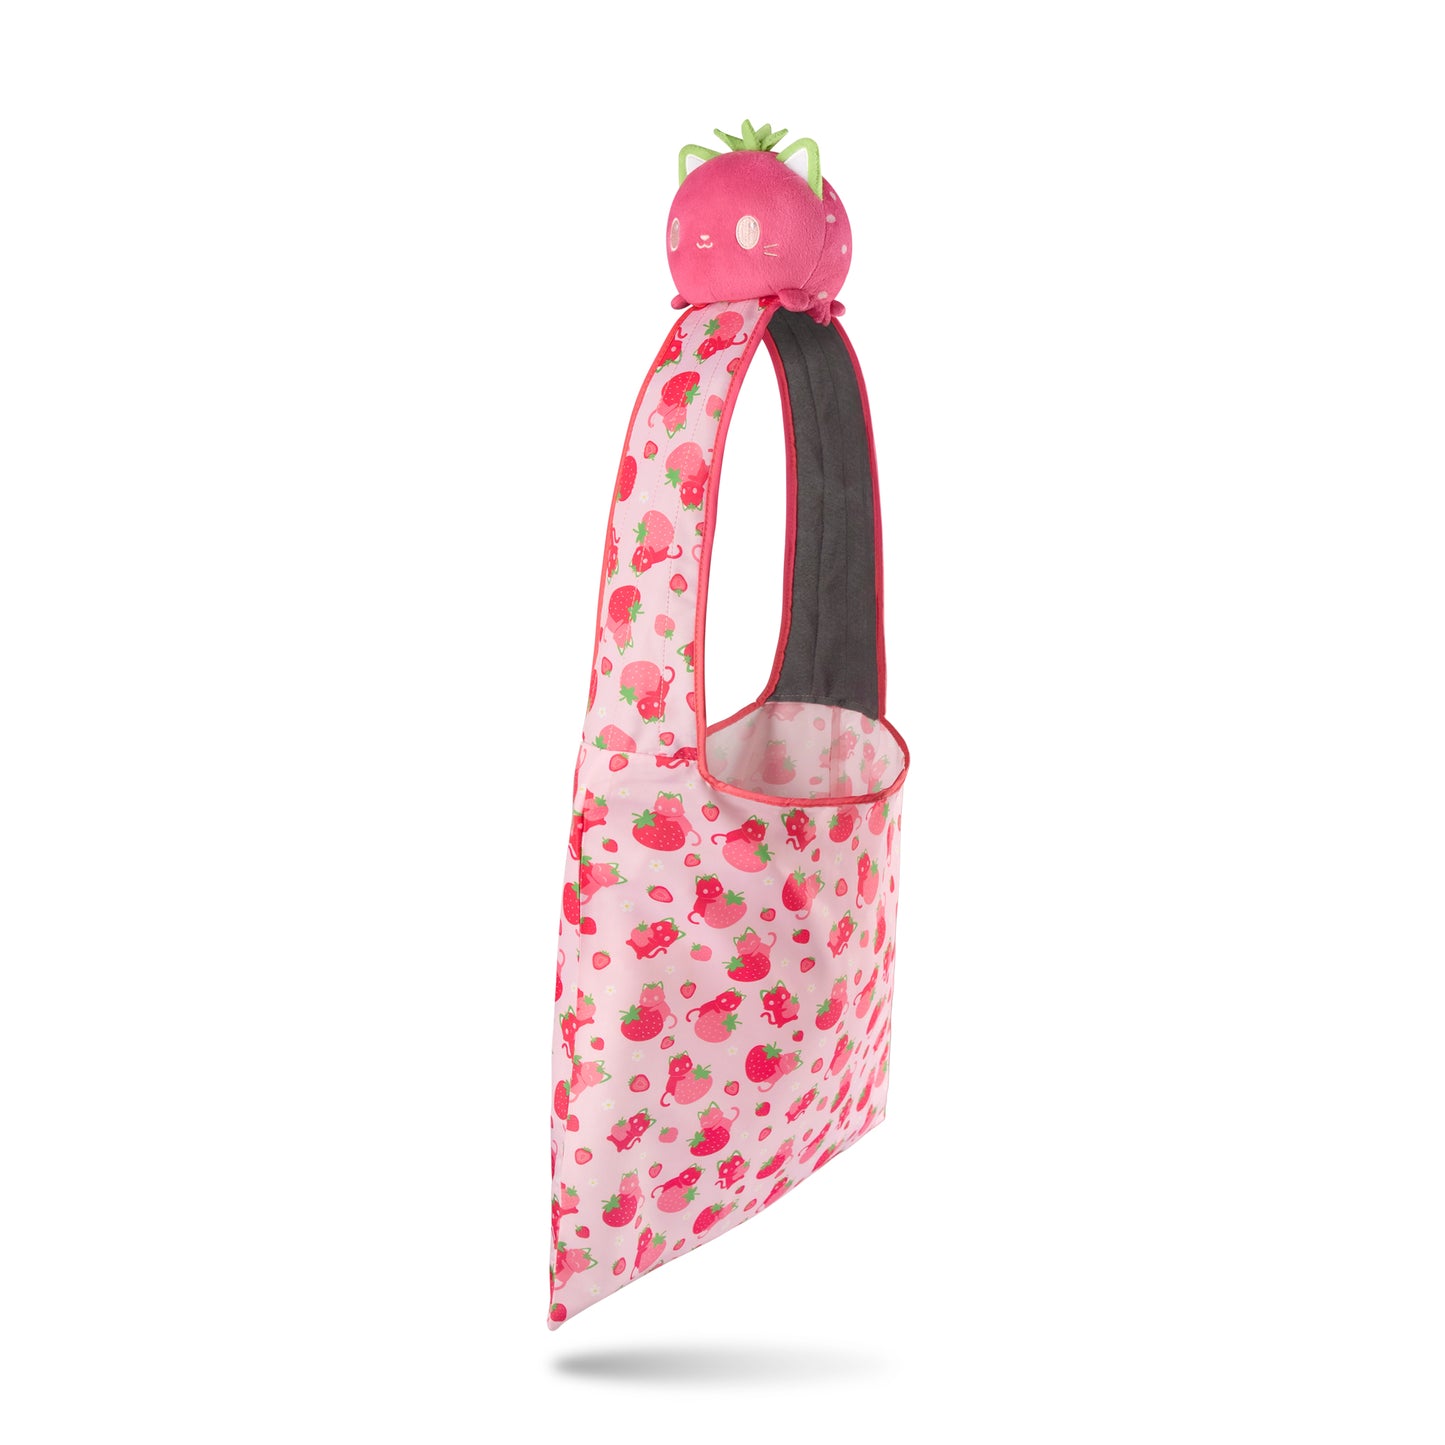 A Plushiverse Strawberry Cat Plushie Tote Bag by TeeTurtle with a strawberry on it.